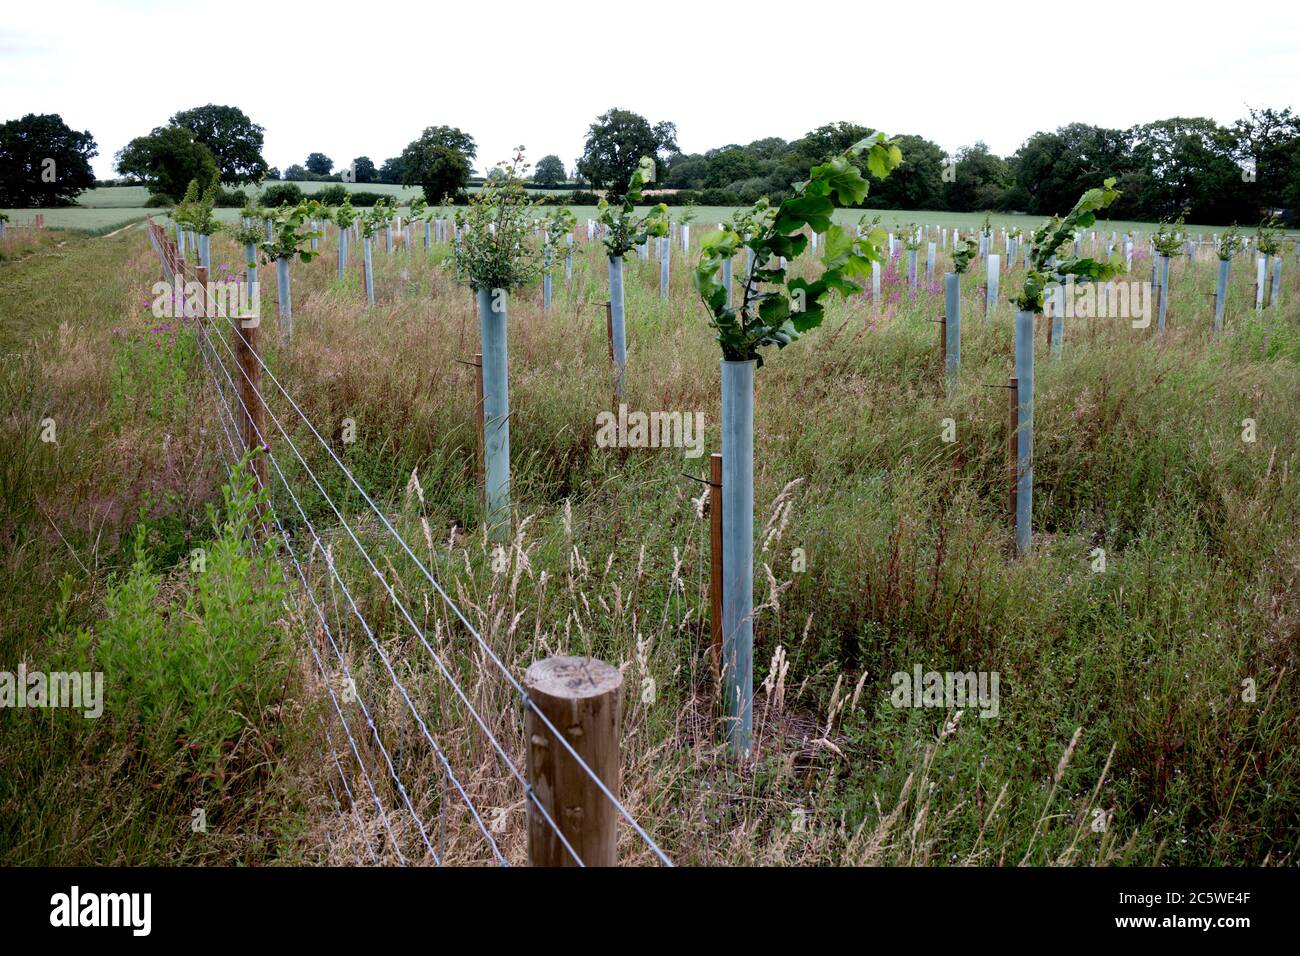 Young trees with plastic tubes for protection, Warwickshire, UK Stock Photo